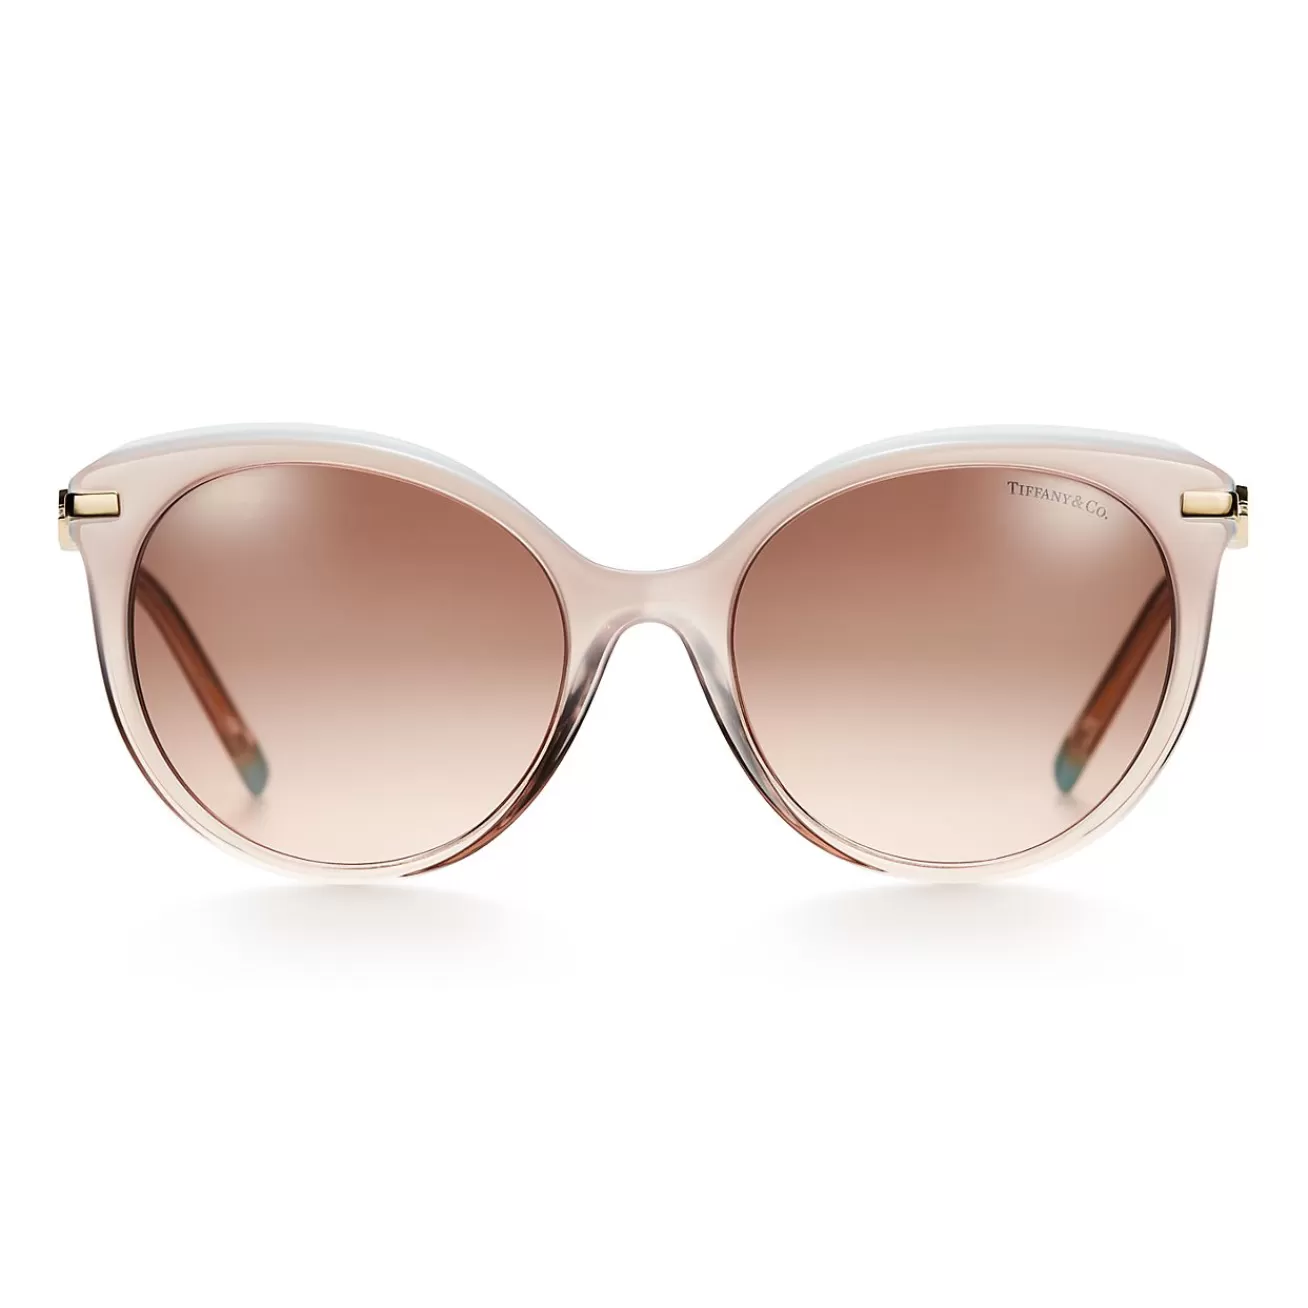 Tiffany & Co. Tiffany Victoria® Sunglasses in Pink Acetate with Gradient Pink and Brown Lenses | ^ Tiffany Victoria® | Sunglasses